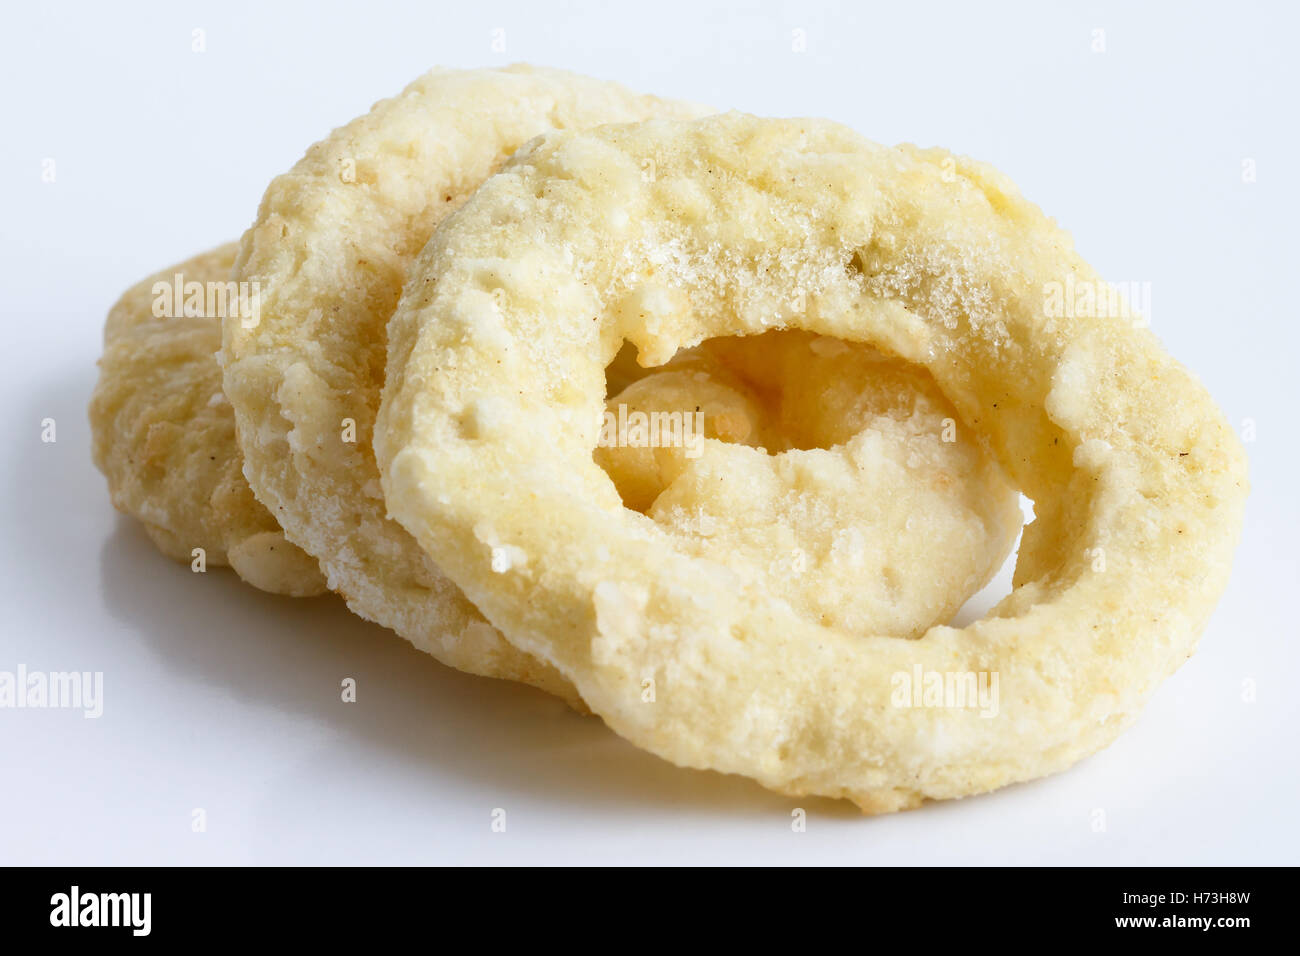 Three frozen uncooked battered onion or calamari rings isolated on grey. Stock Photo